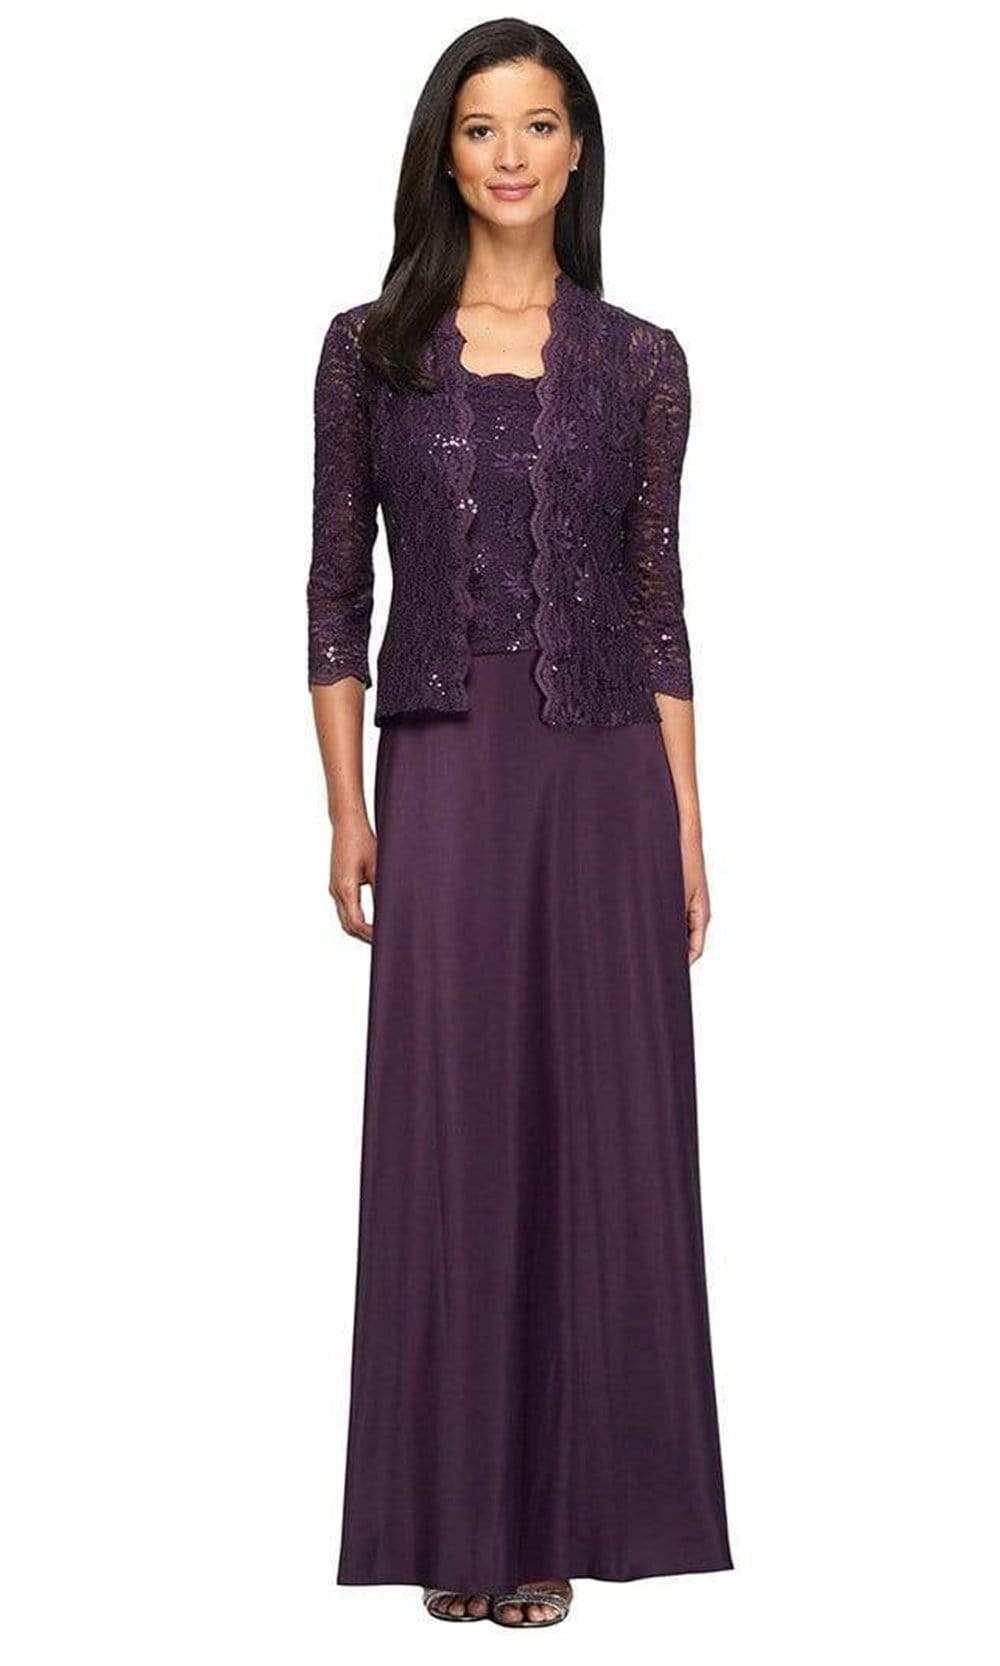 Alex Evenings - 4121198 Sequin Lace and Chiffon Dress with Lace Jacket